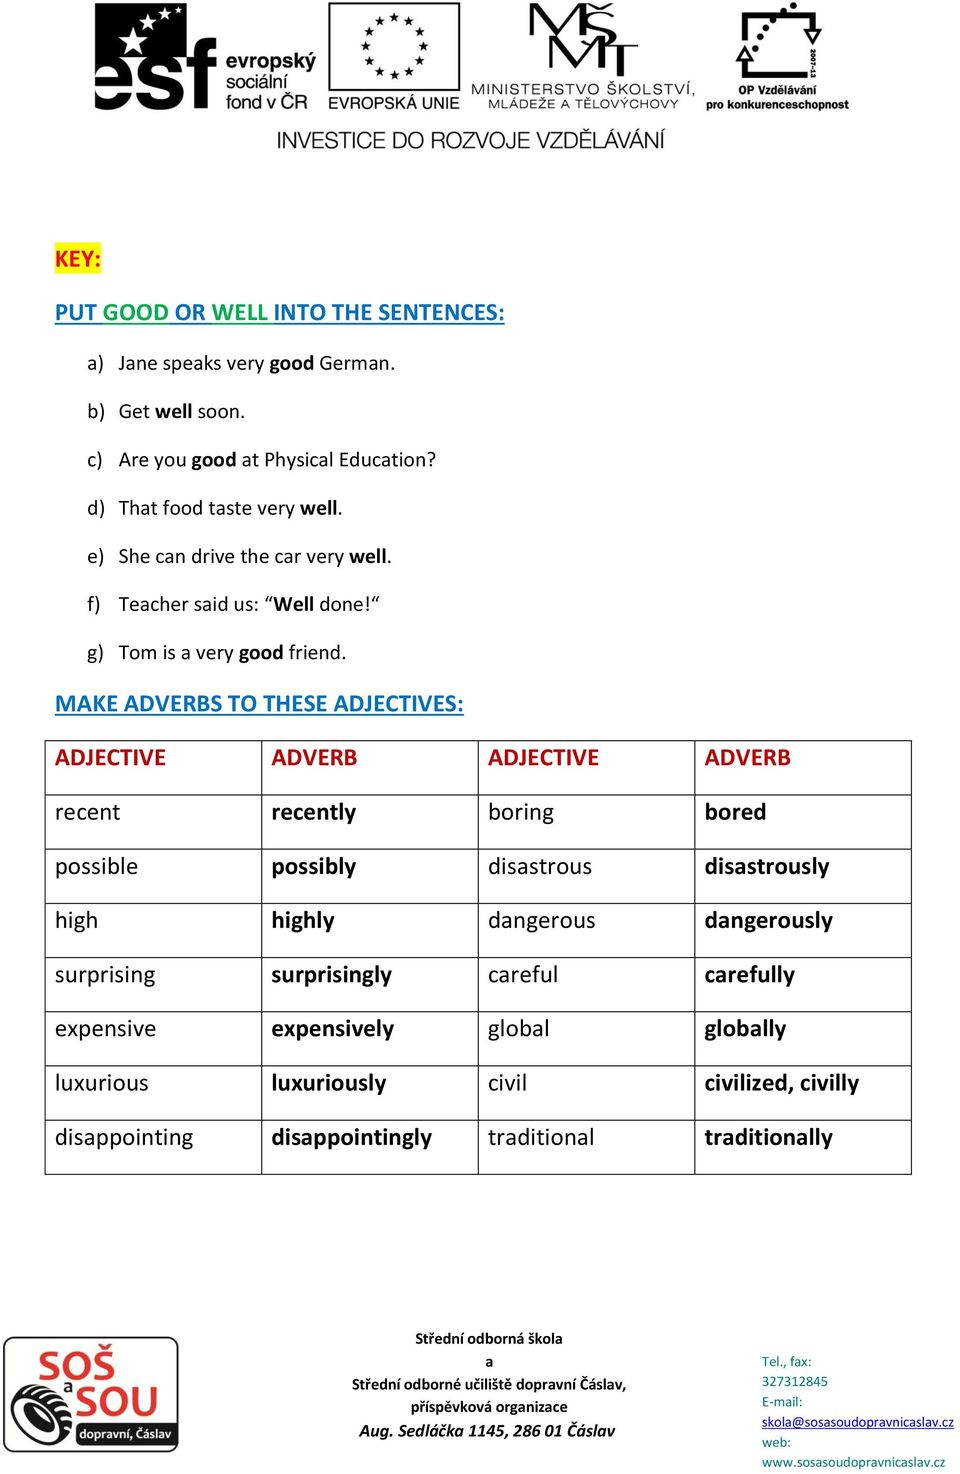 MAKE ADVERBS TO THESE ADJECTIVES: ADJECTIVE ADVERB ADJECTIVE ADVERB recent recently boring bored possible possibly disstrous disstrously high highly